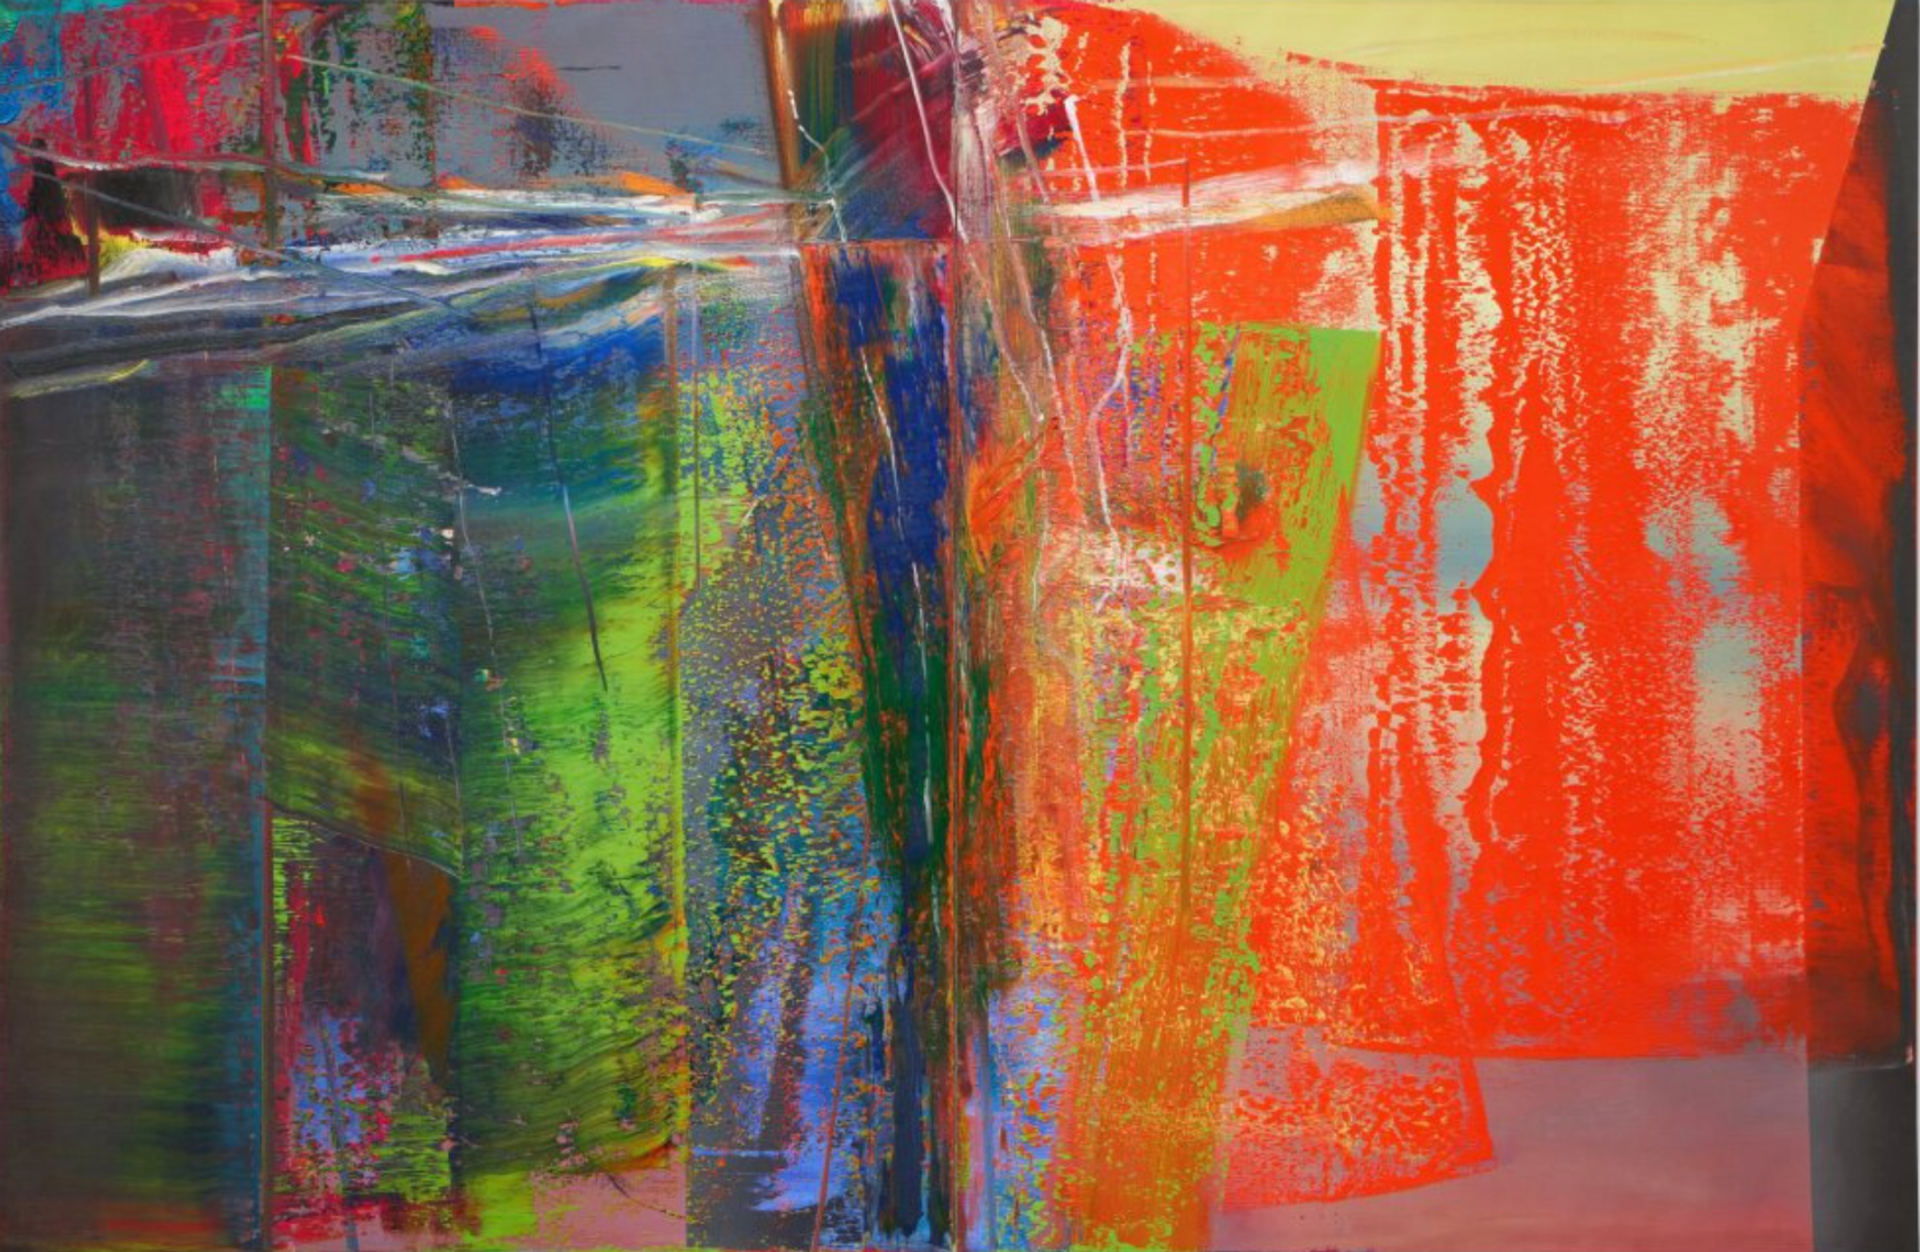 Abstract painting by Gerhard Richter, featuring abstract smears of red, green, blue pink and grey.